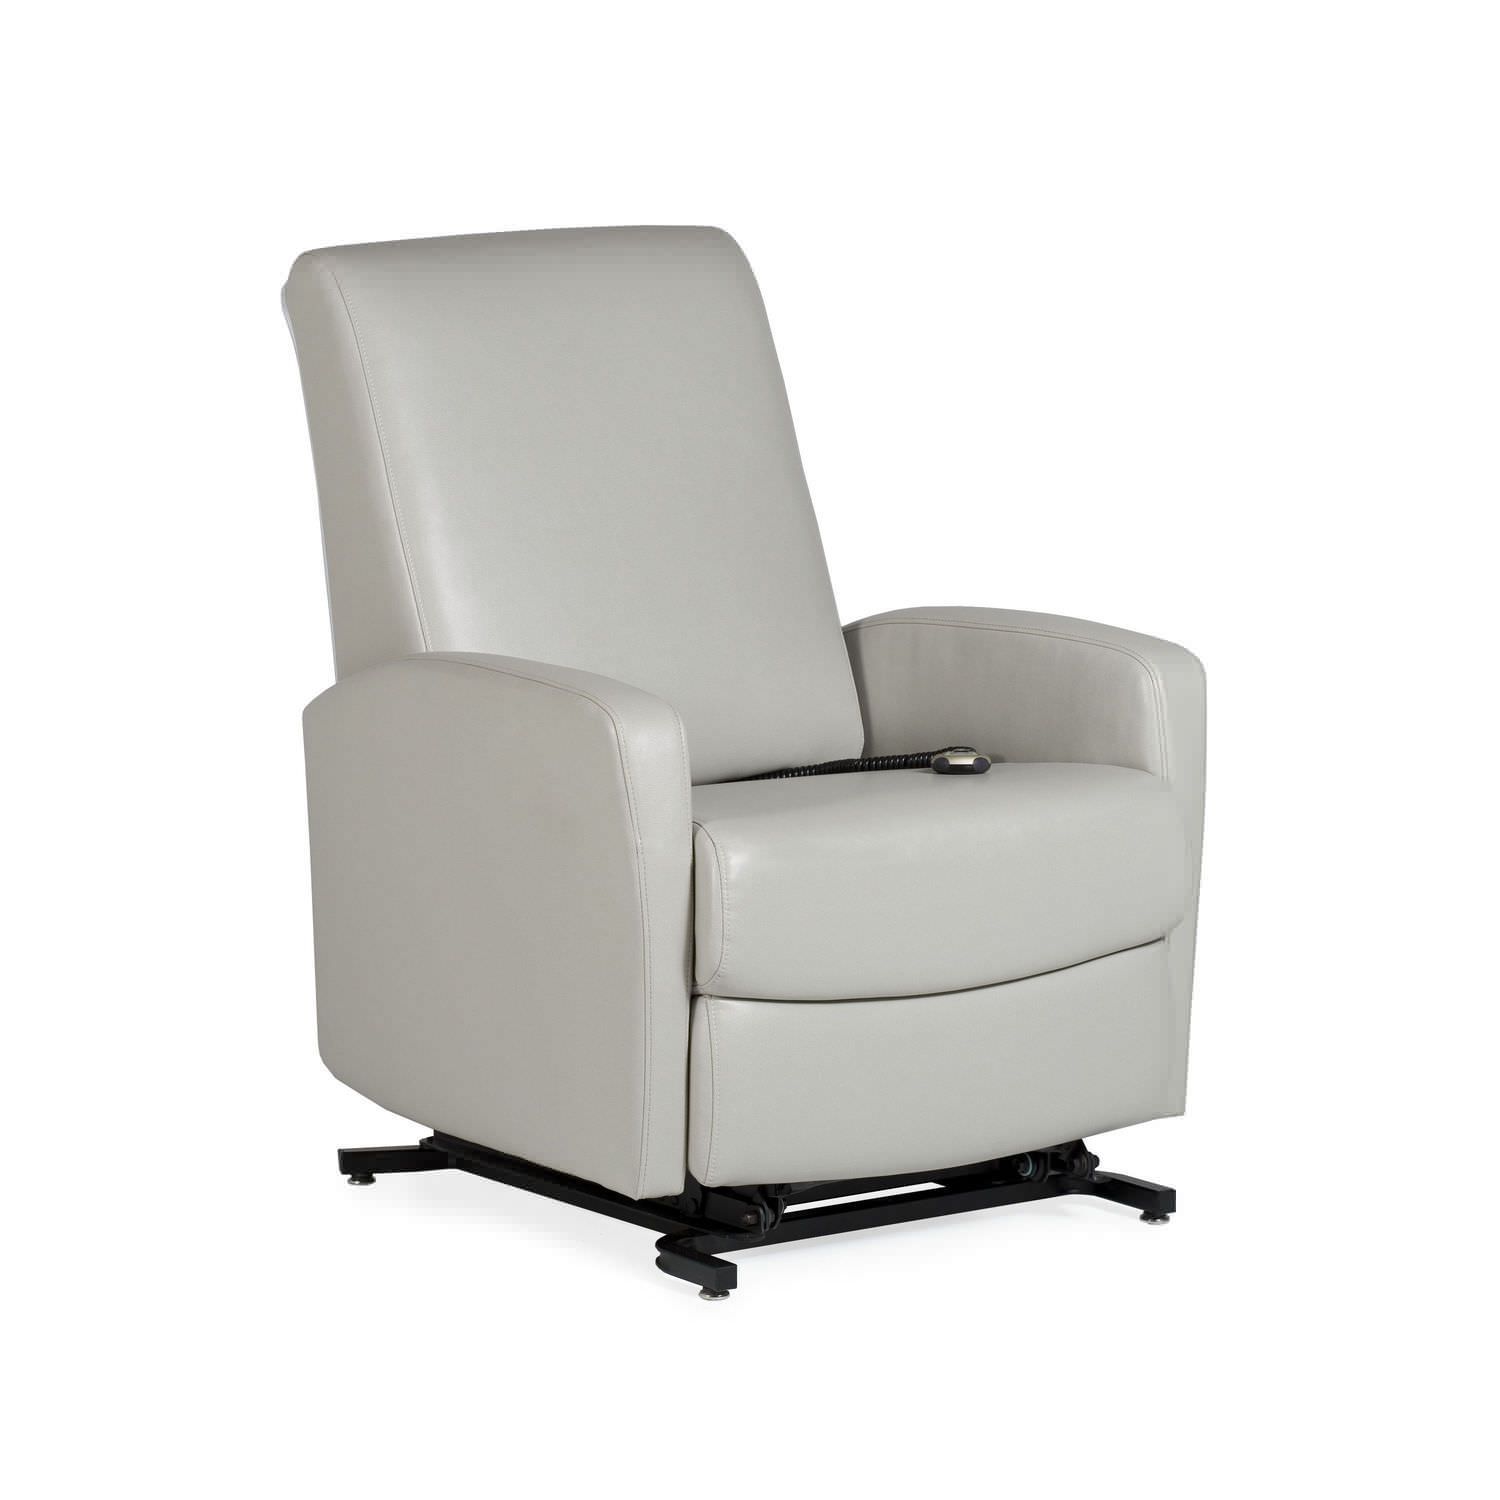 Medical sleeper chair with legrest / reclining / lifting / electrical K-Komfort K9L14 Knú Healthcare